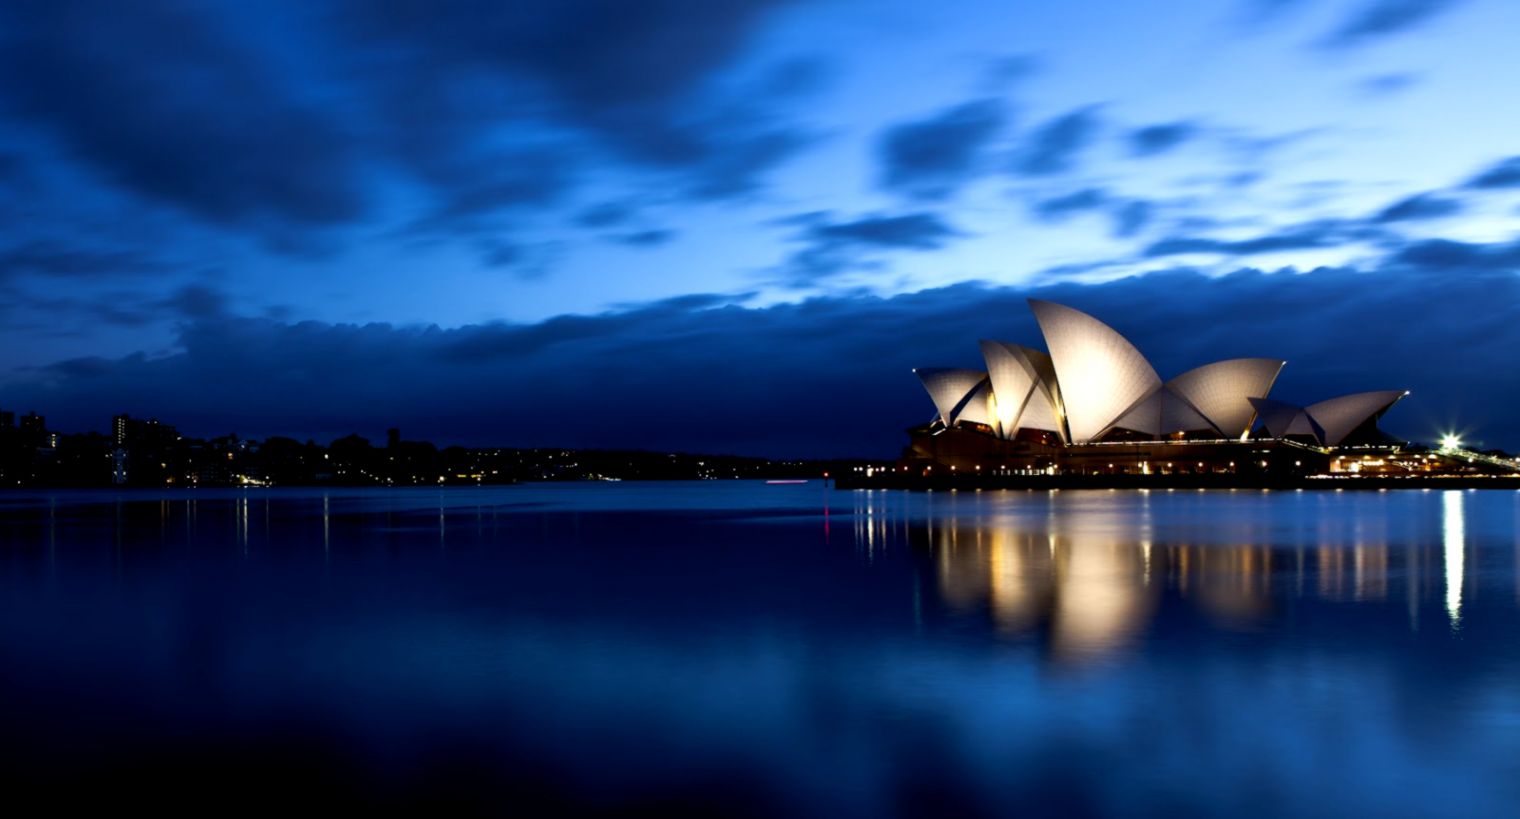 Sydney Opera House Hd Image Pic Wpd0014739 - Best Places To Visit Hd - HD Wallpaper 